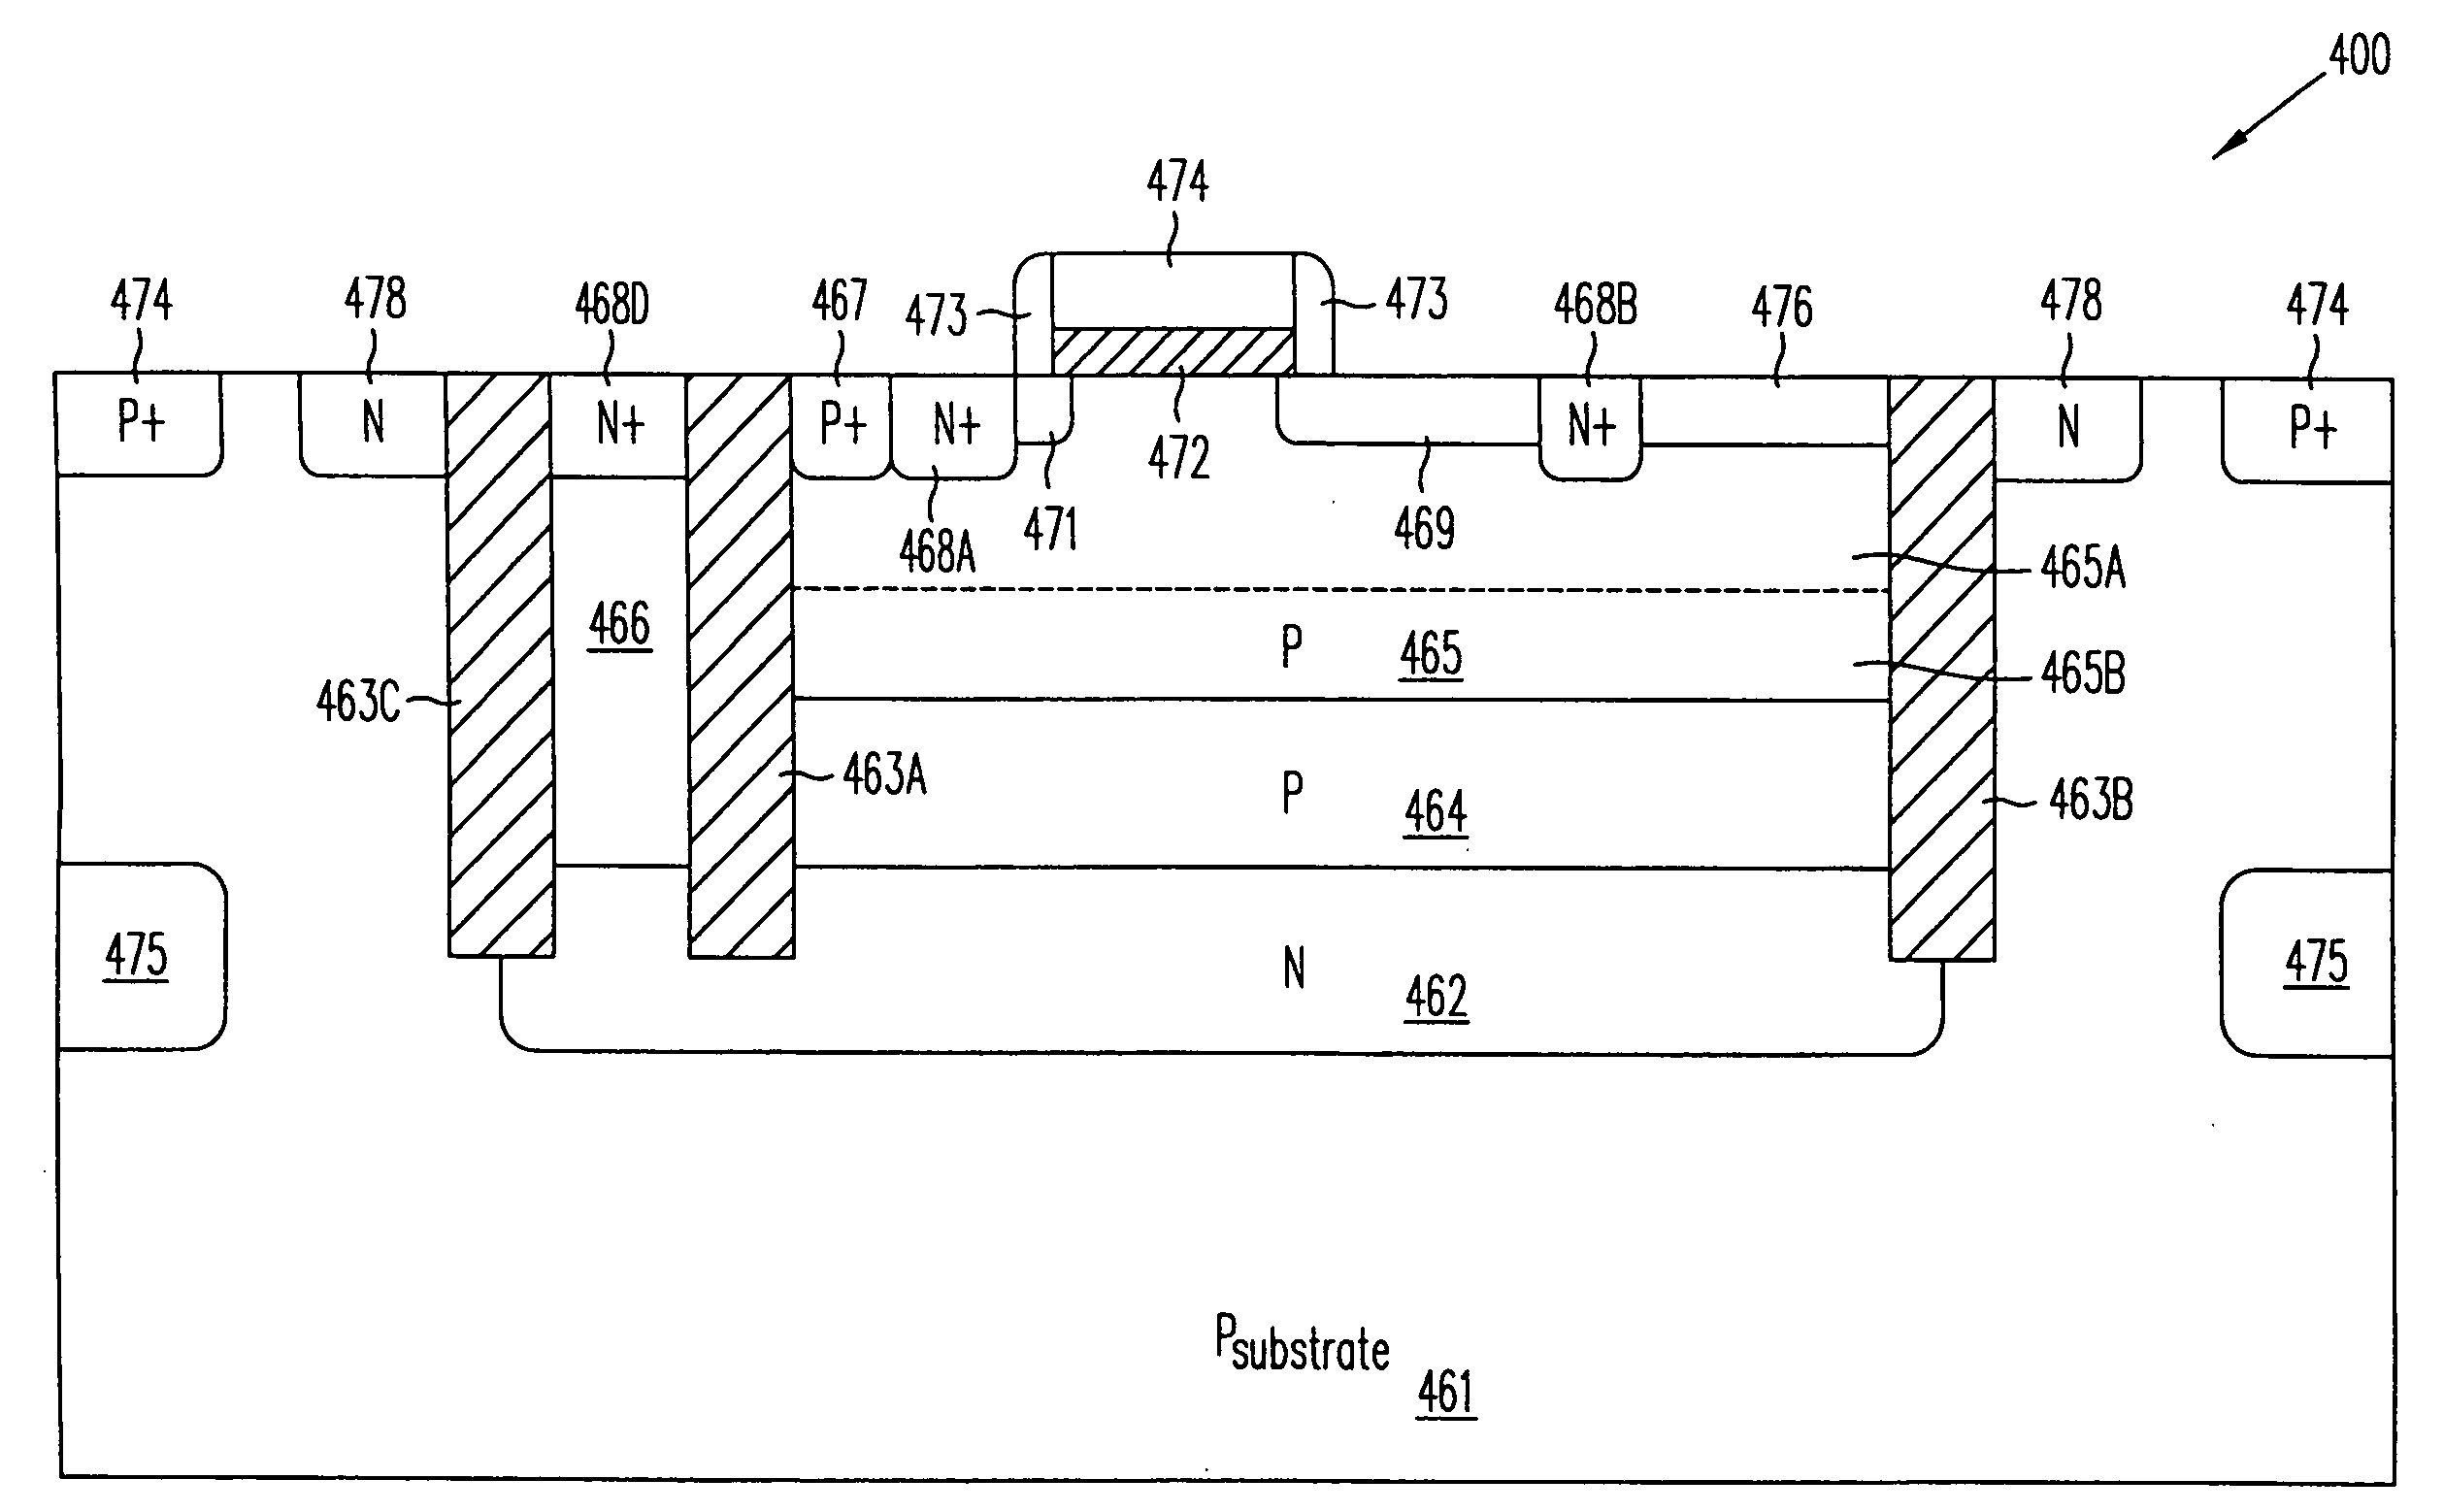 Isolation and termination structures for semiconductor die